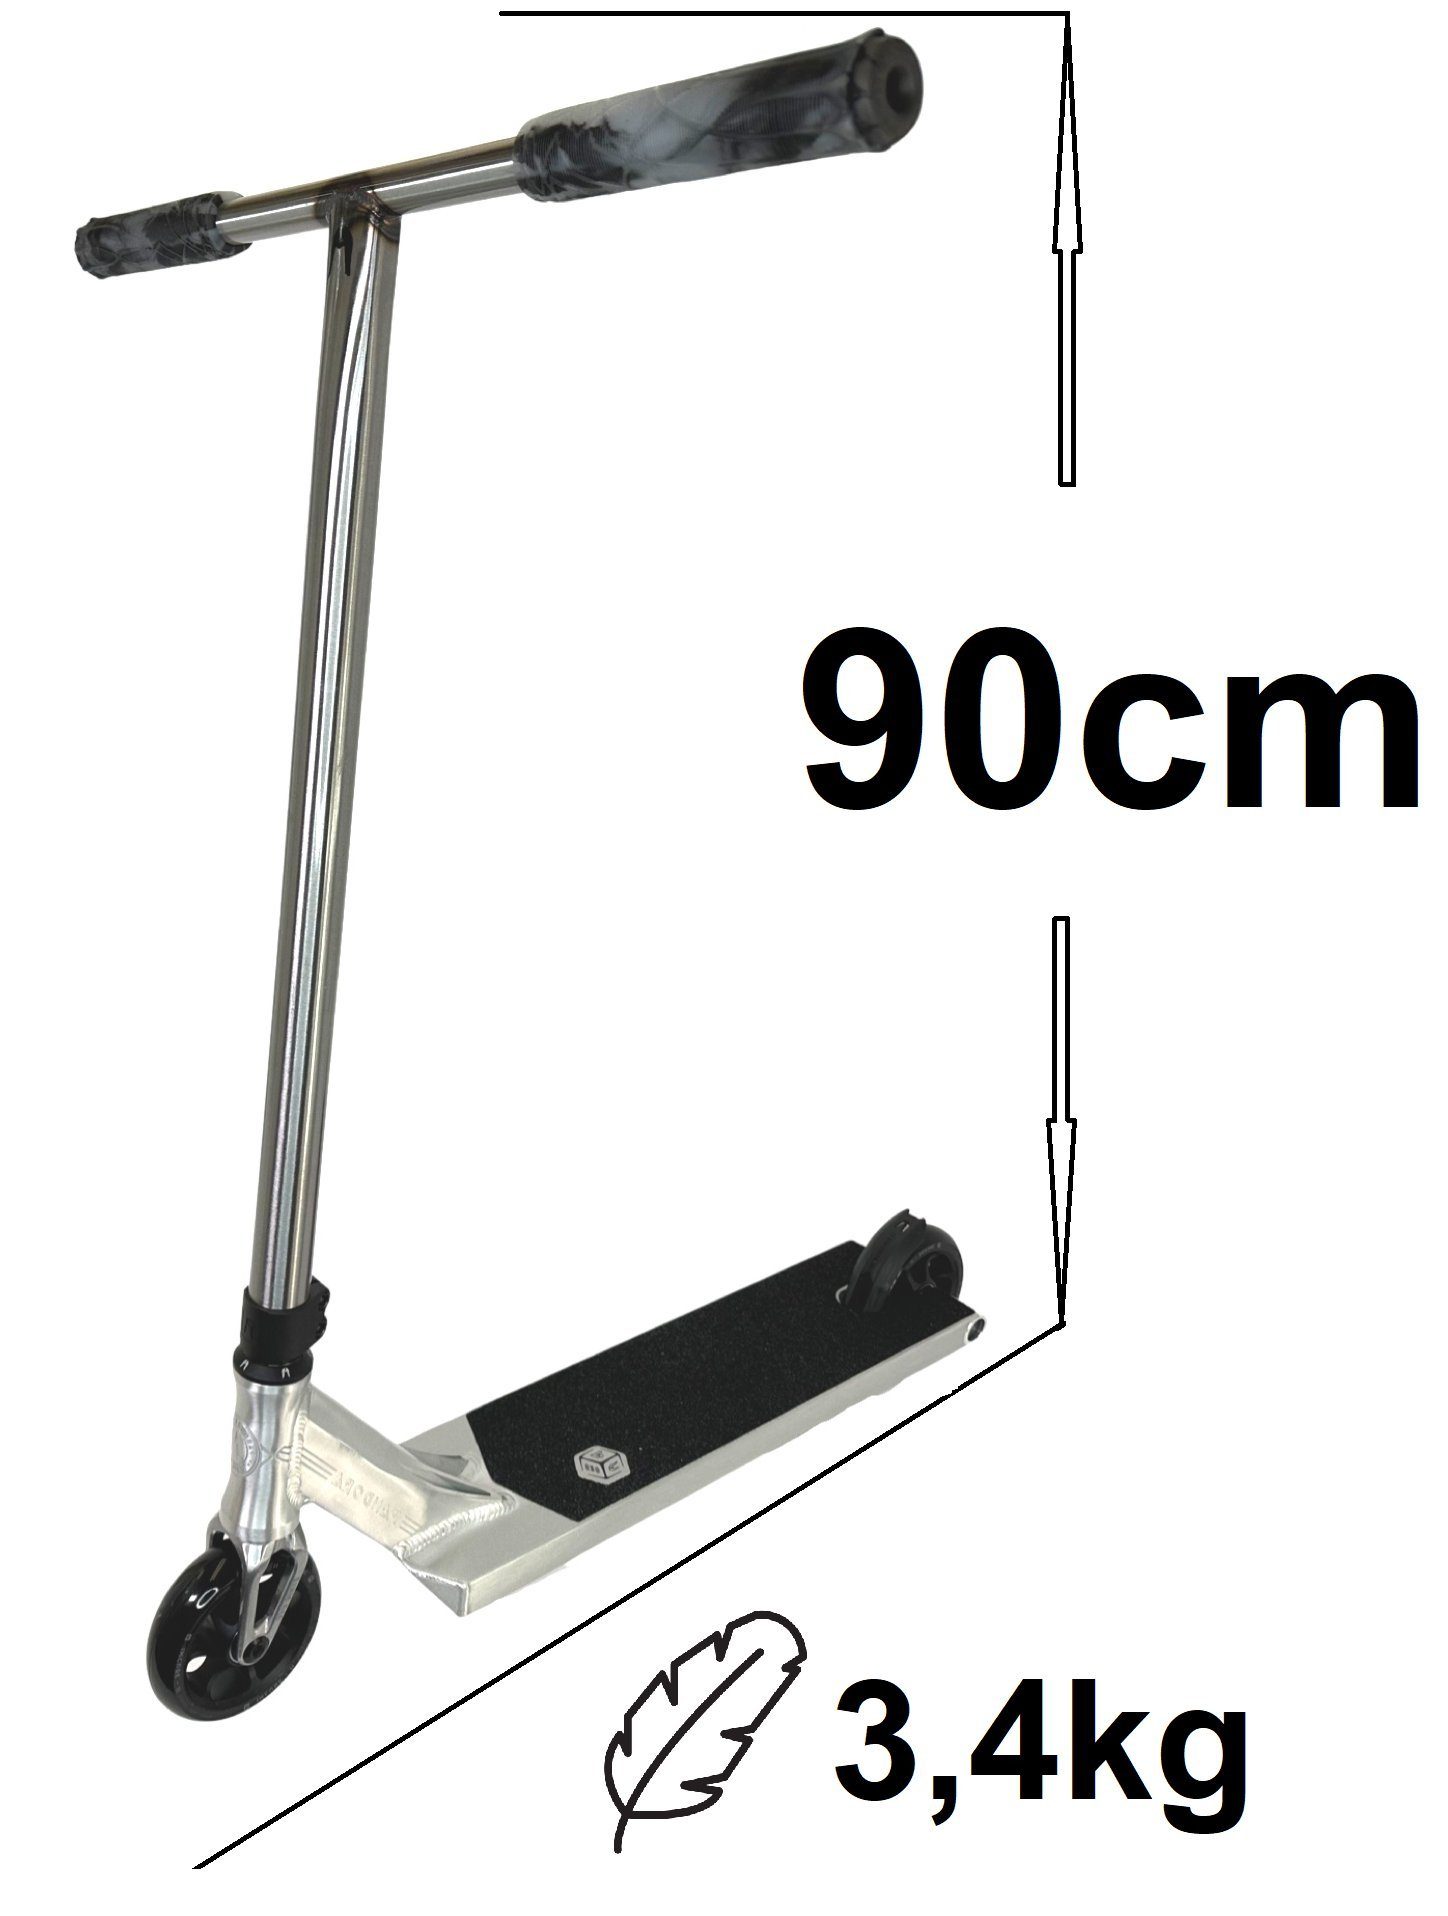 H=90cm DTC 3,4kg Stuntscooter Ethic Silber Stunt-Scooter DTC Ethic L Pandora